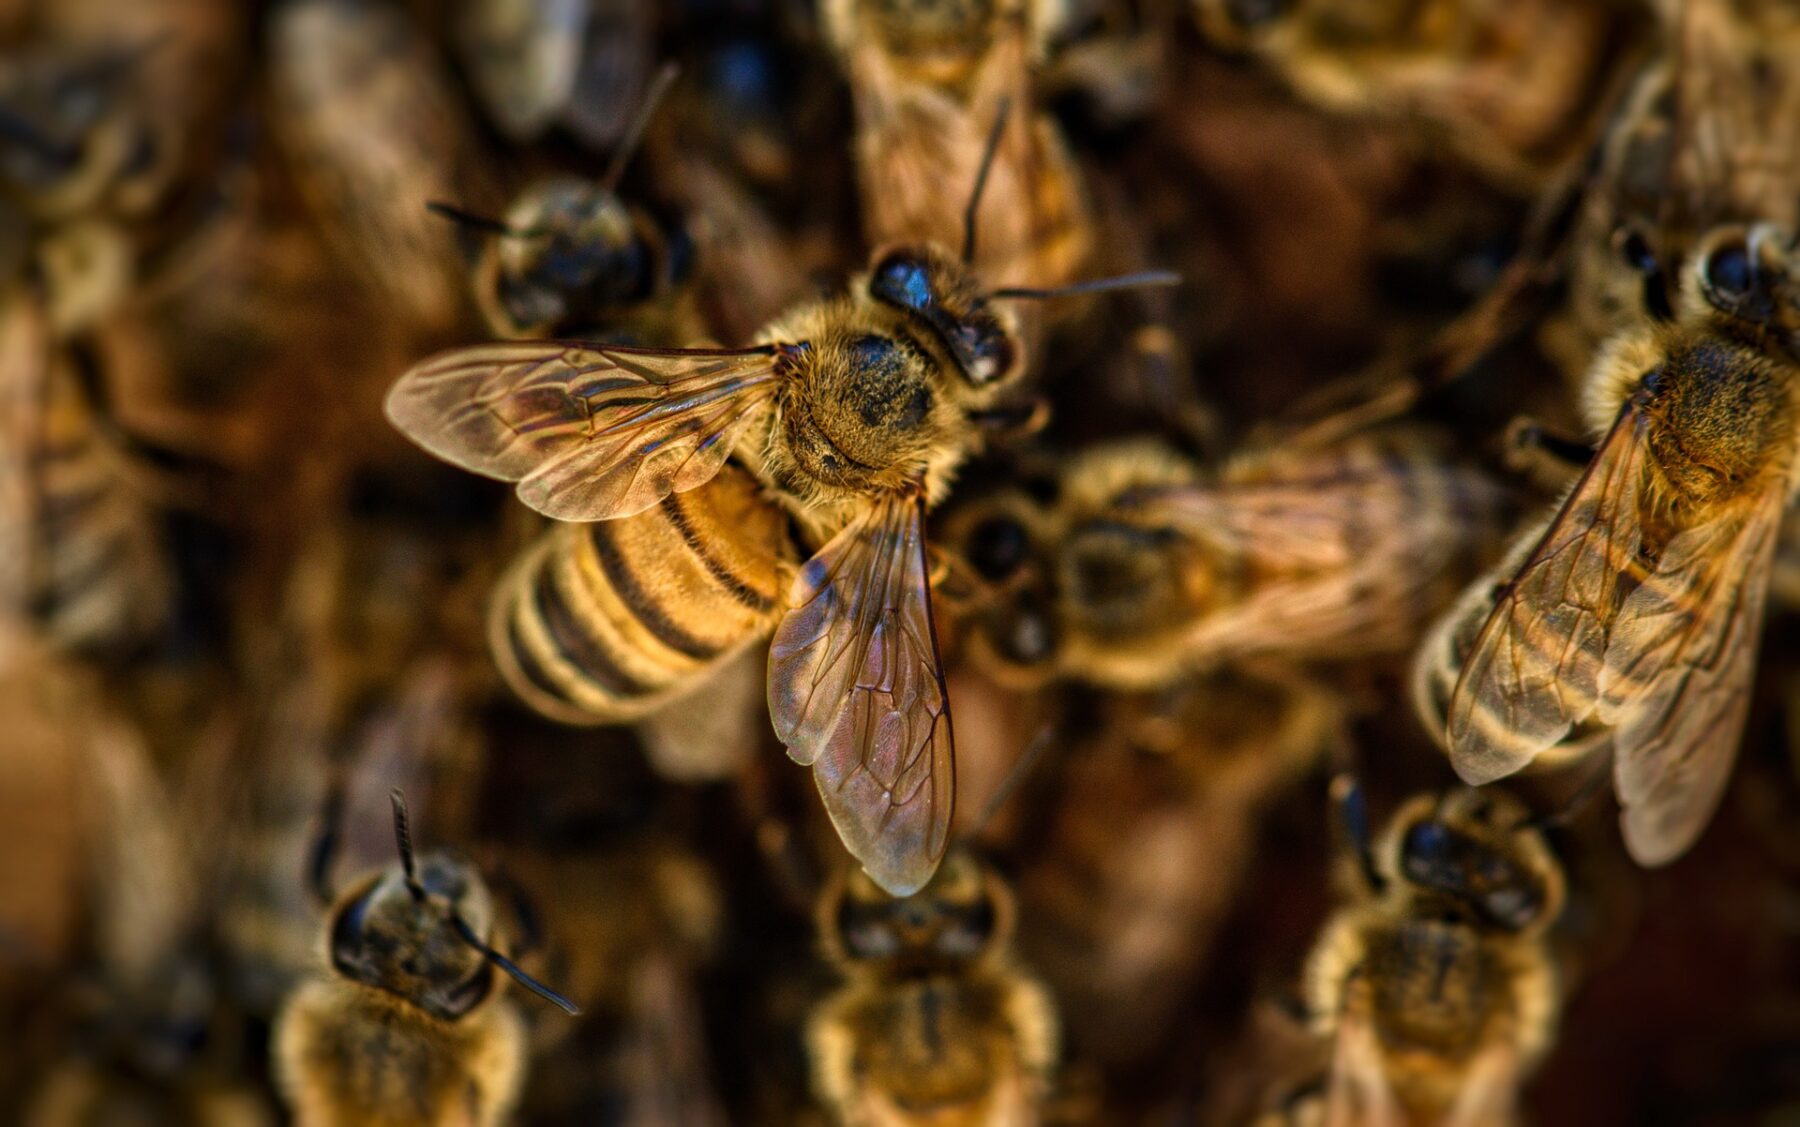 Colony of bees on top of each other with one bee in focus